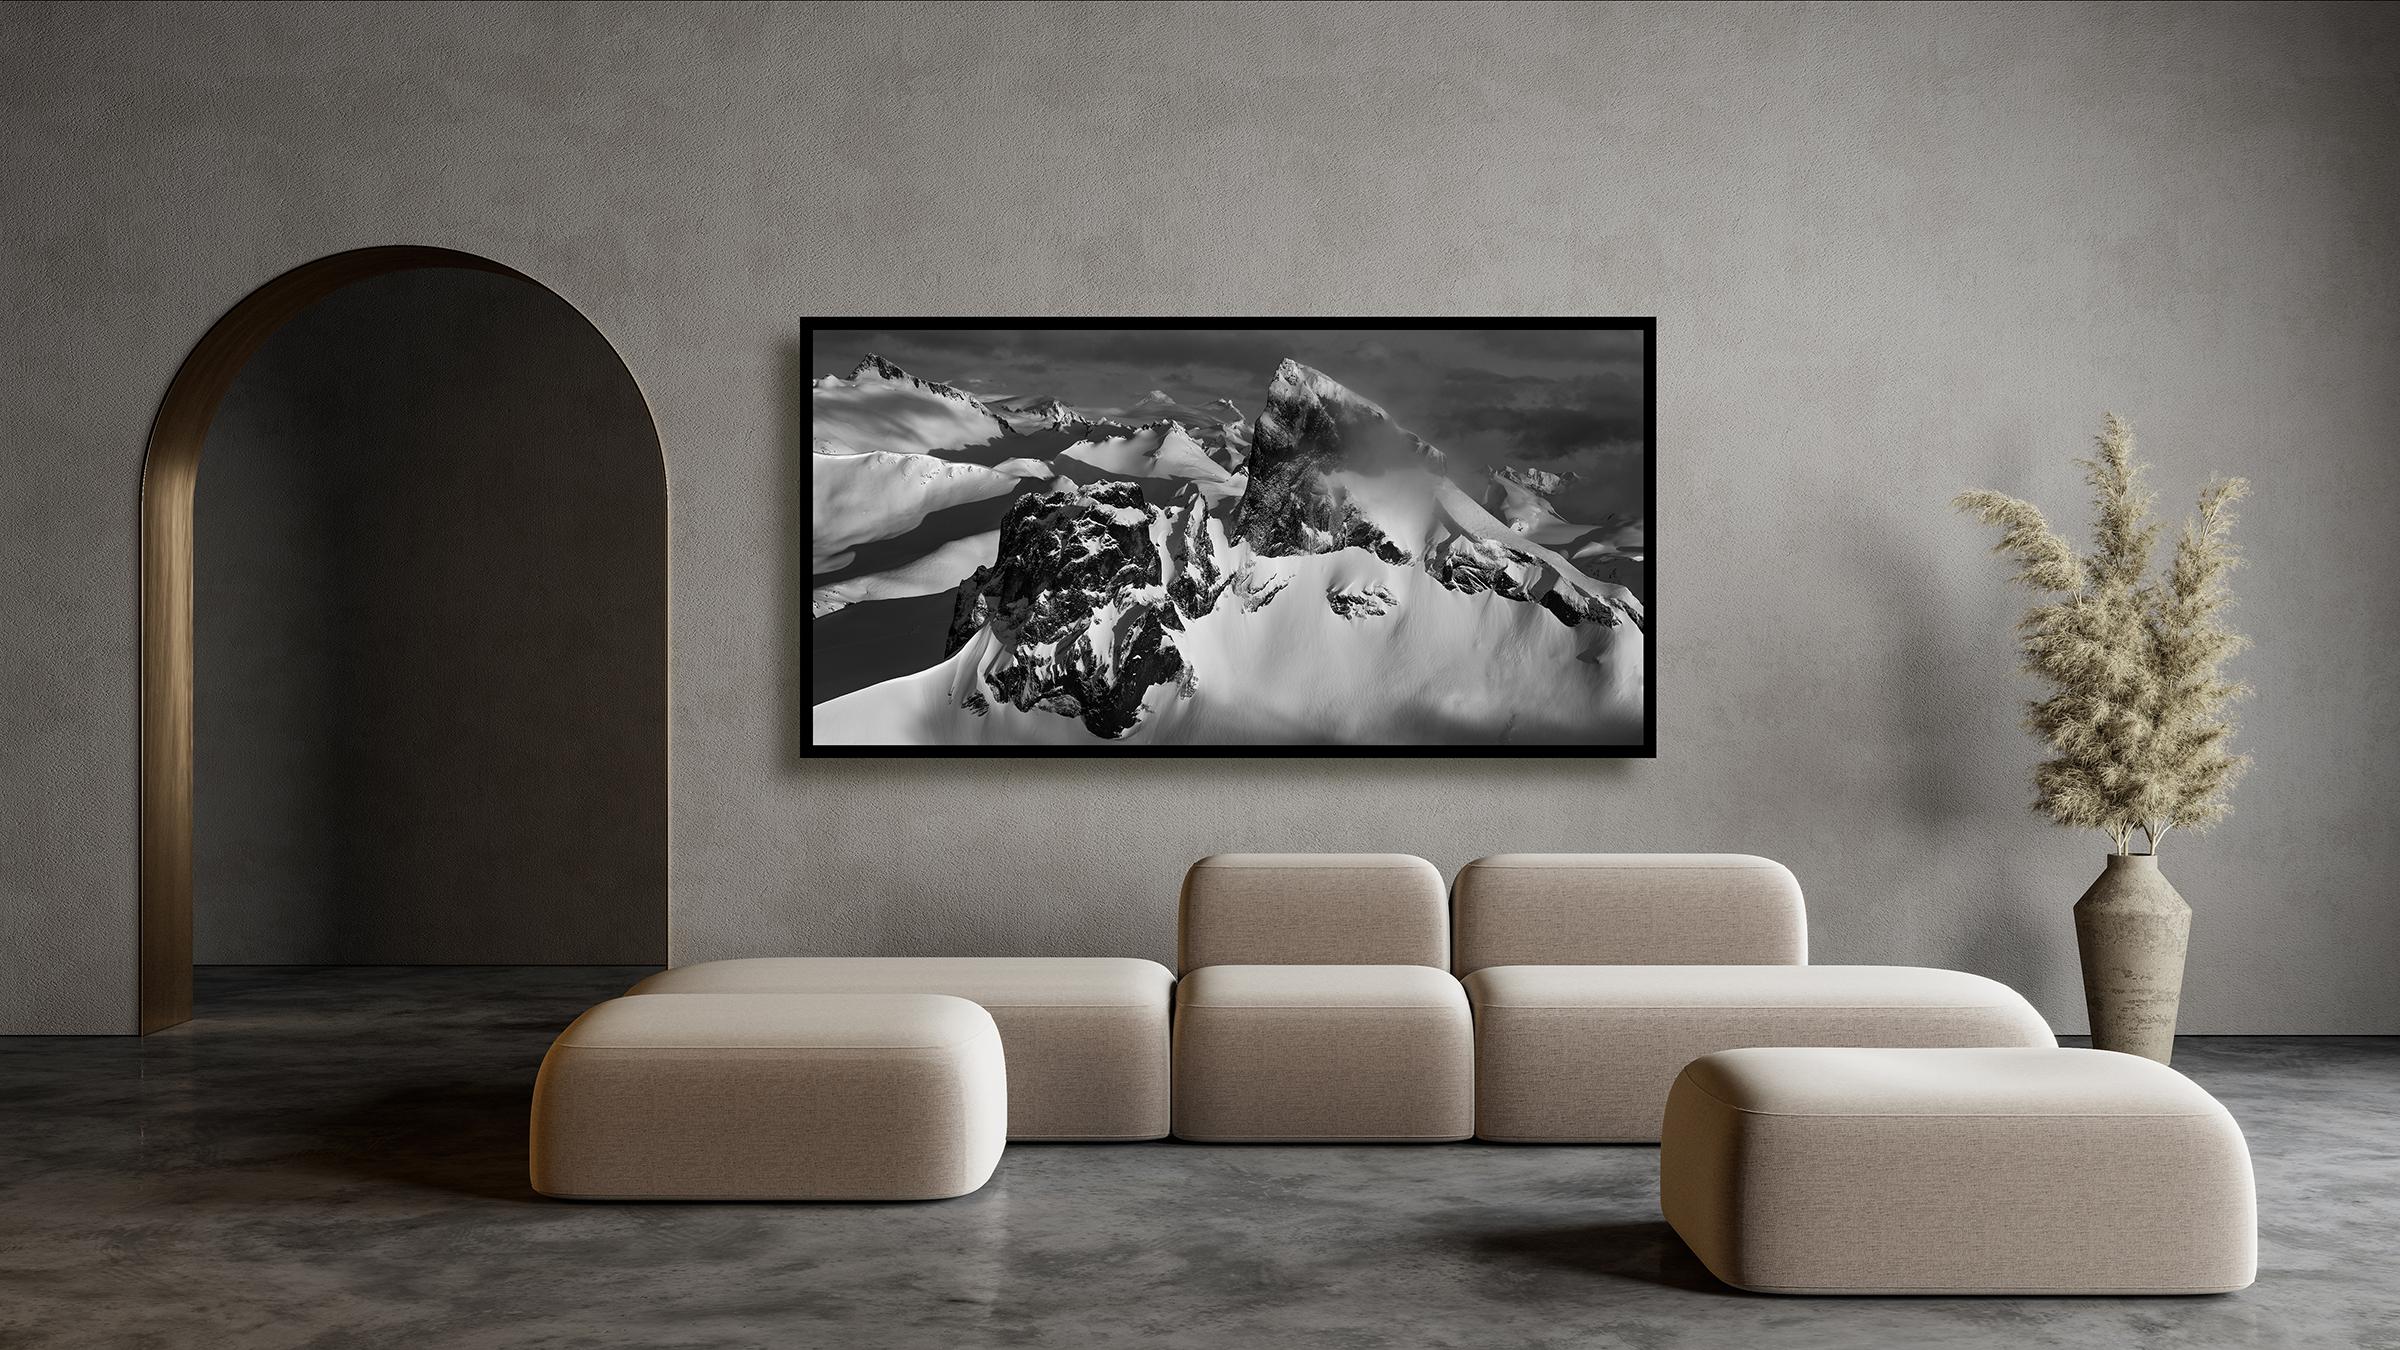 Black Tusk #13, Whistler, black and white, contemporary, landscape photograph - Other Art Style Photograph by Jussi Grznar 